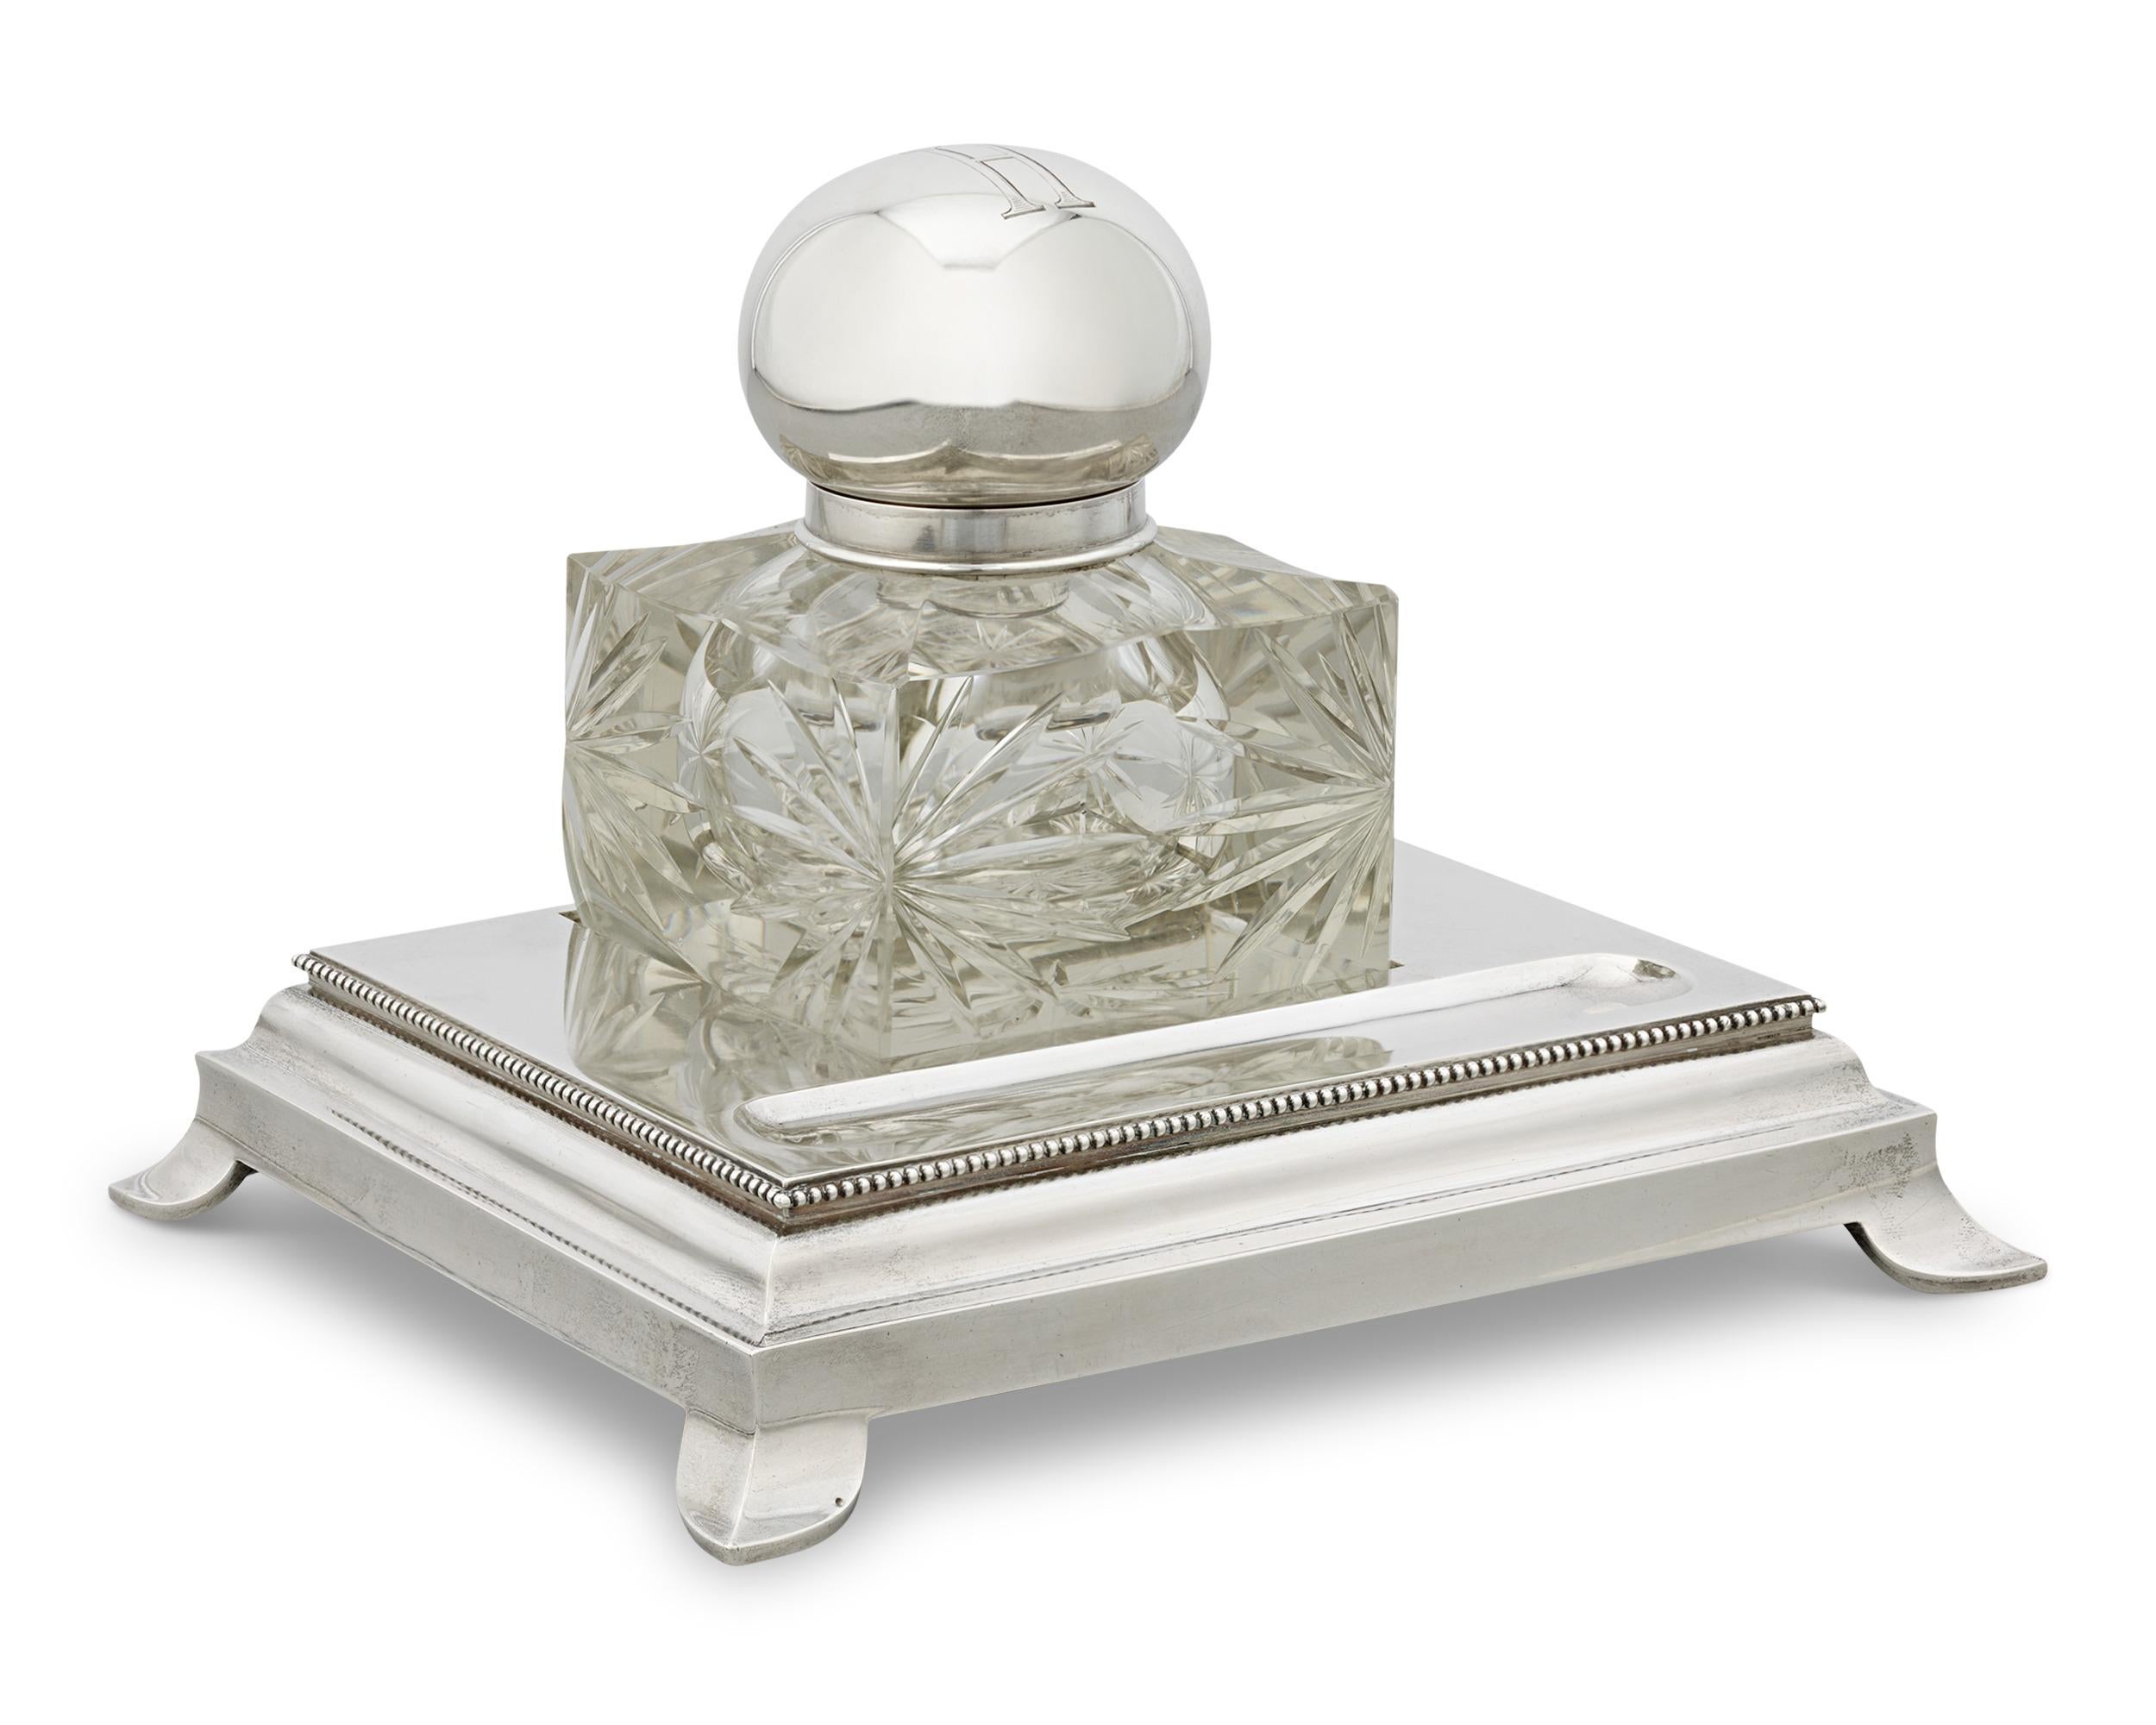 This exquisite inkwell by the legendary Grachev Brothers was made for Czar Nicholas of Russia. Featuring intricately cut glass in a star pattern, the inkwell rests upon an exquisite silver base. Its refined, neoclassical design is completed by a